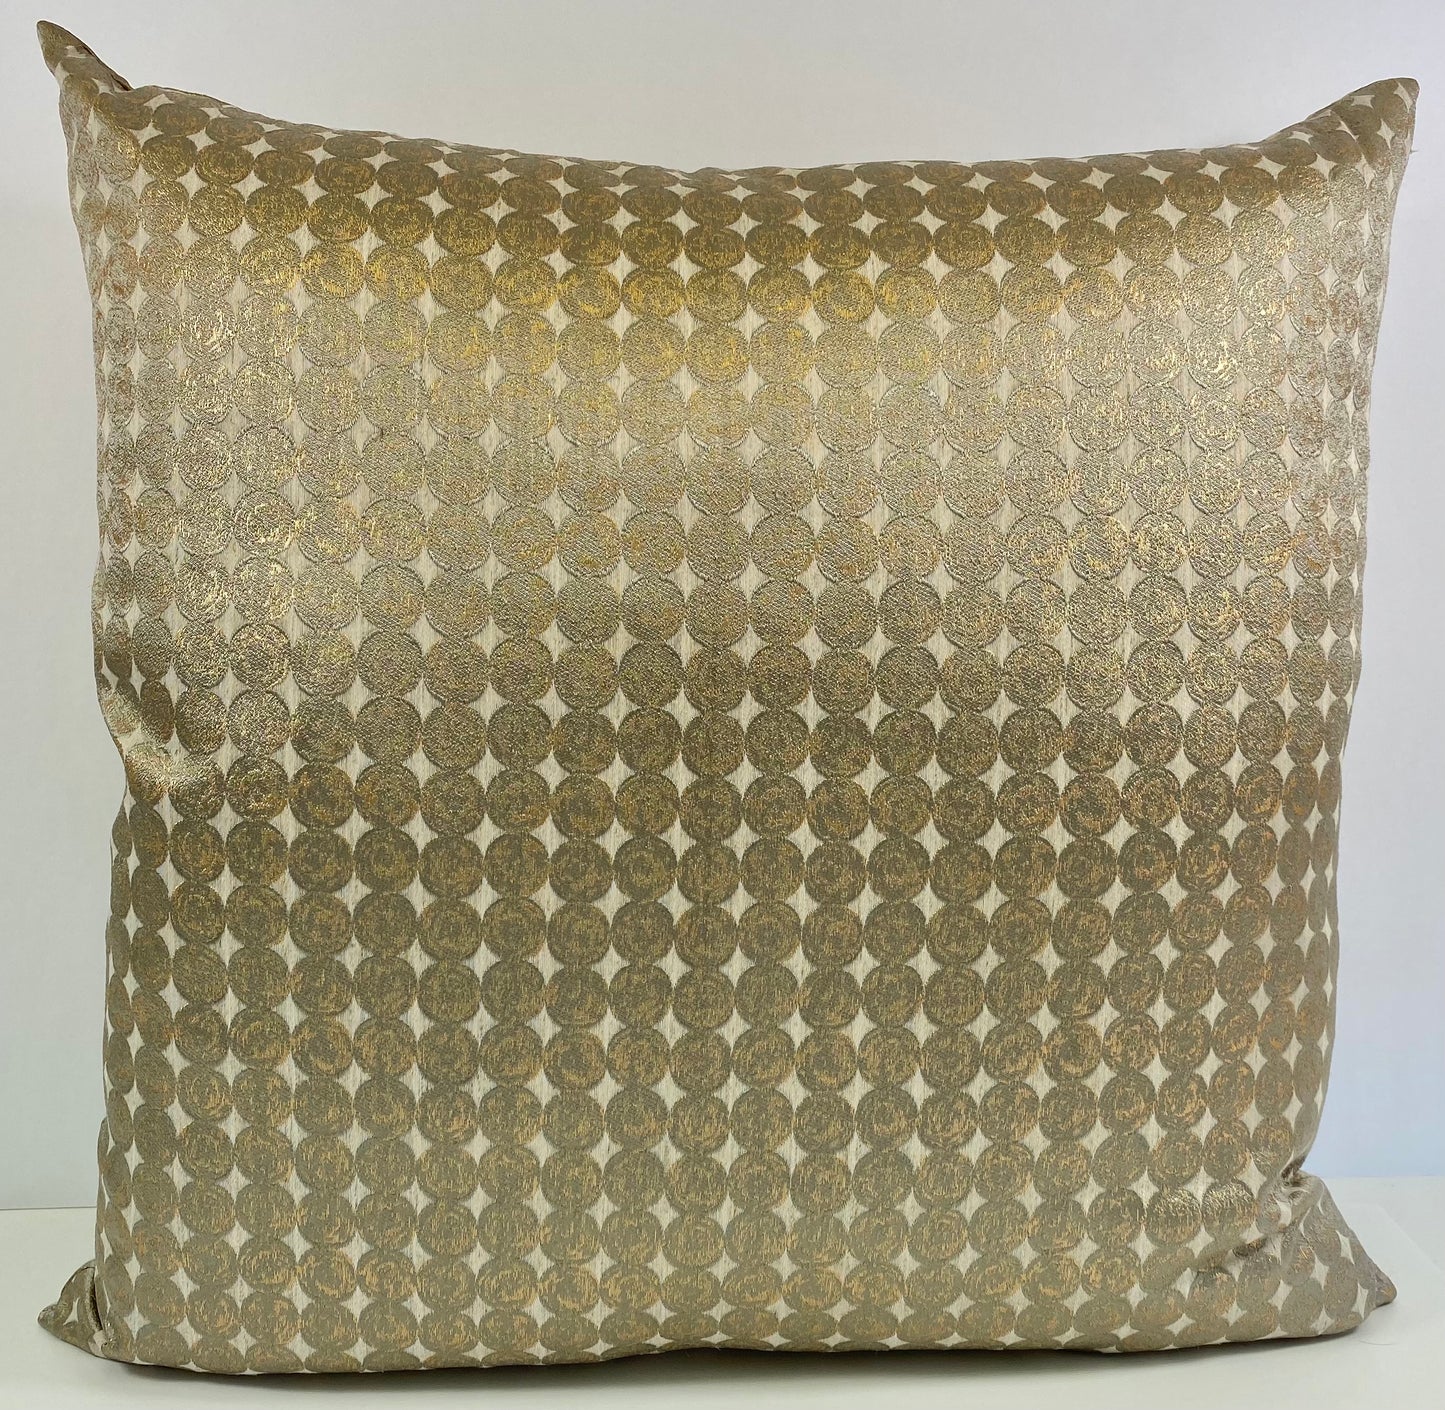 REDUCED TO CLEAR Luxury Pillow; 24" x 24" - Francis, dots of shimmering gold over taupe cast on a cream background